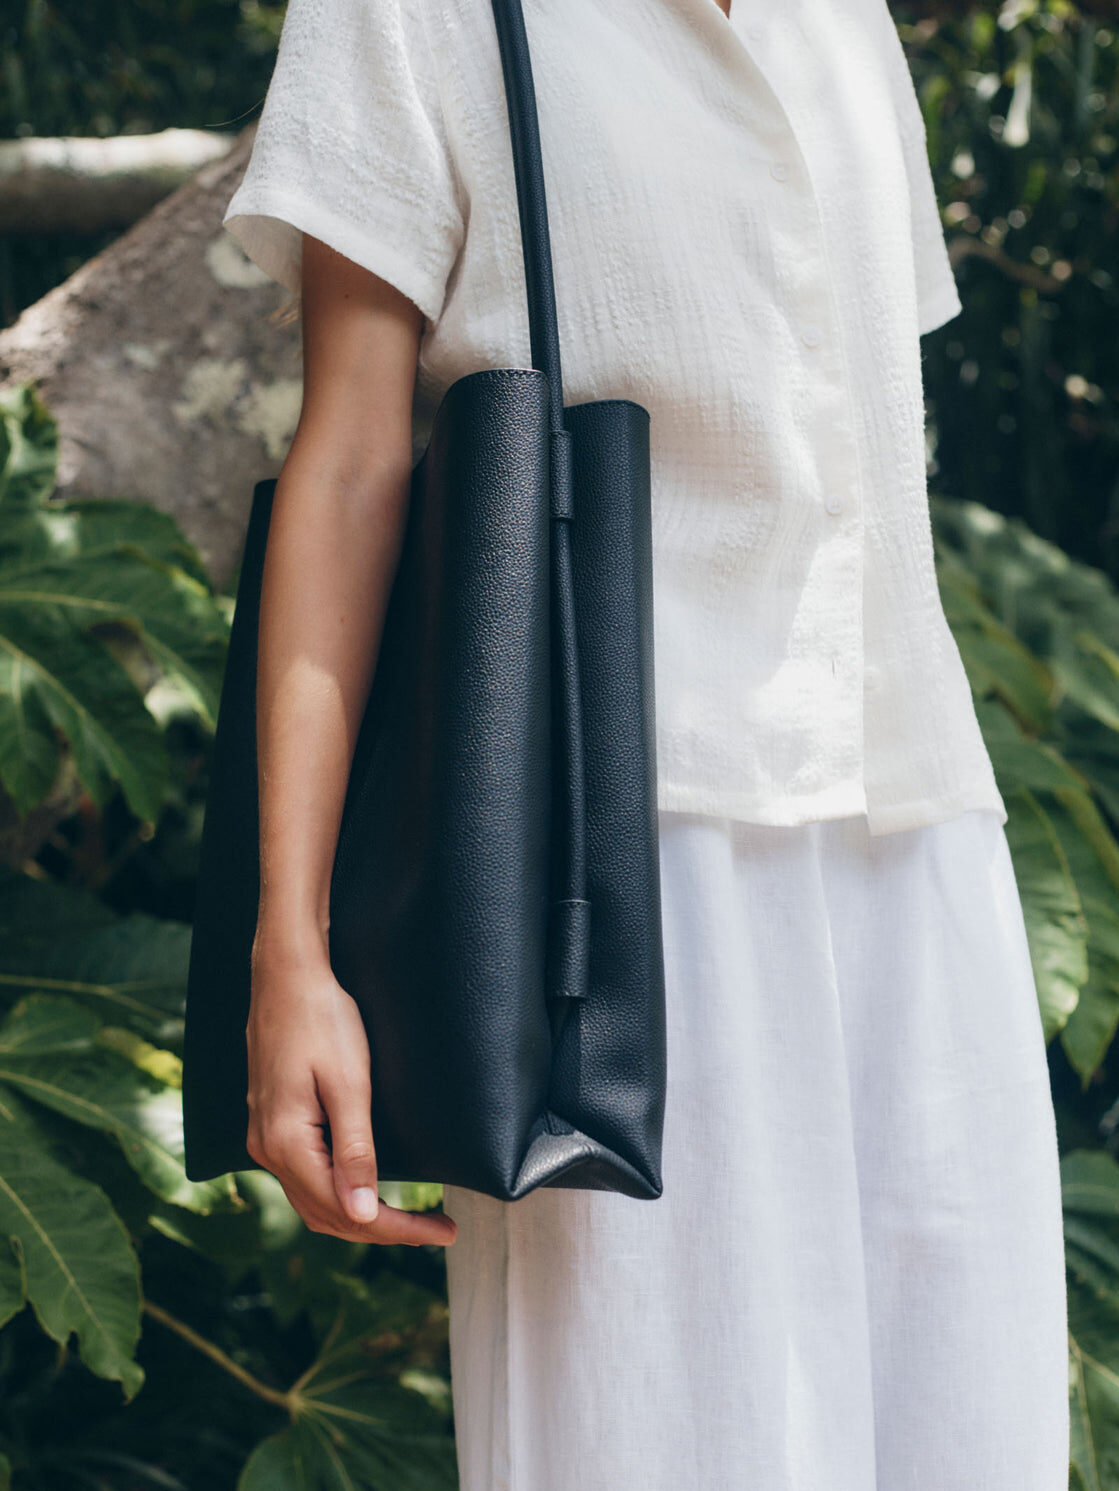 The Search for the Ultimate Black Tote Bag